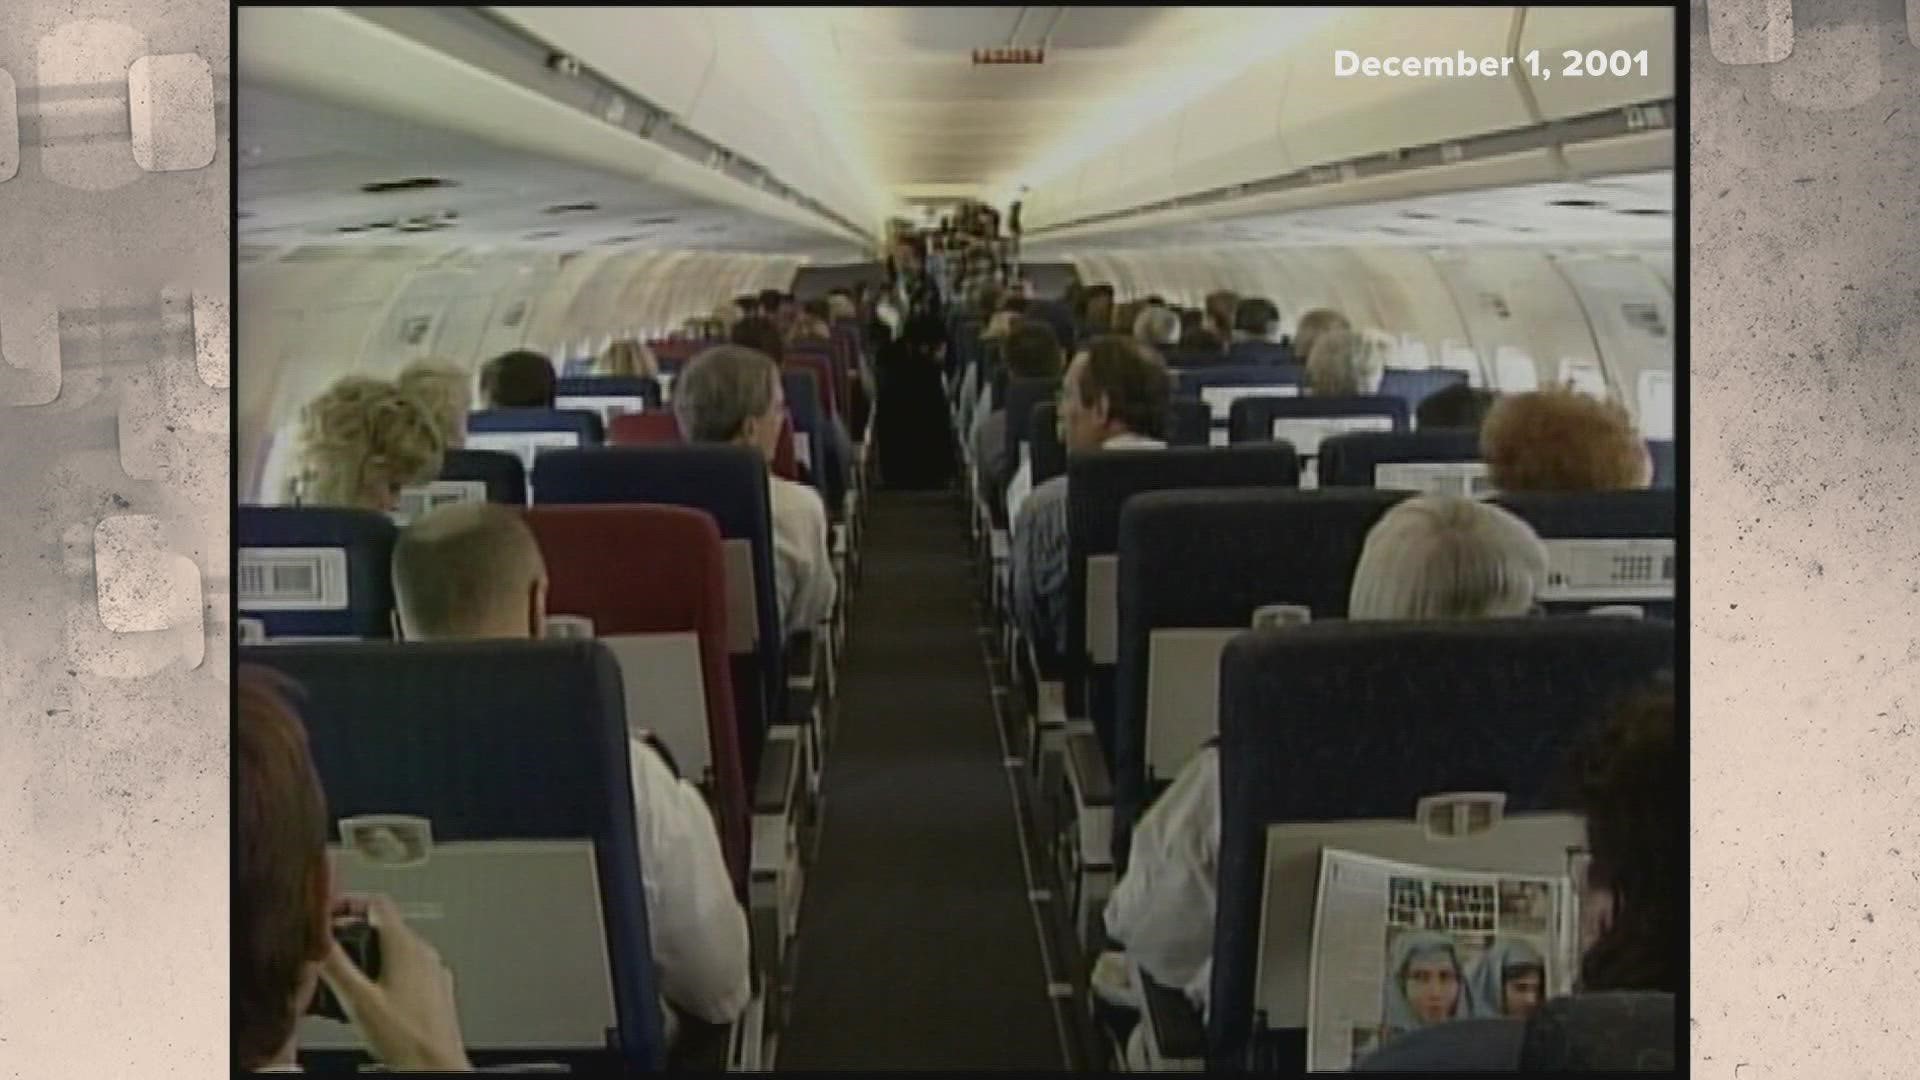 This week's Vintage KSDK takes us back to Dec. 1, 2001, the day of the last TWA flight. It was an emotional time for employees of the airline.